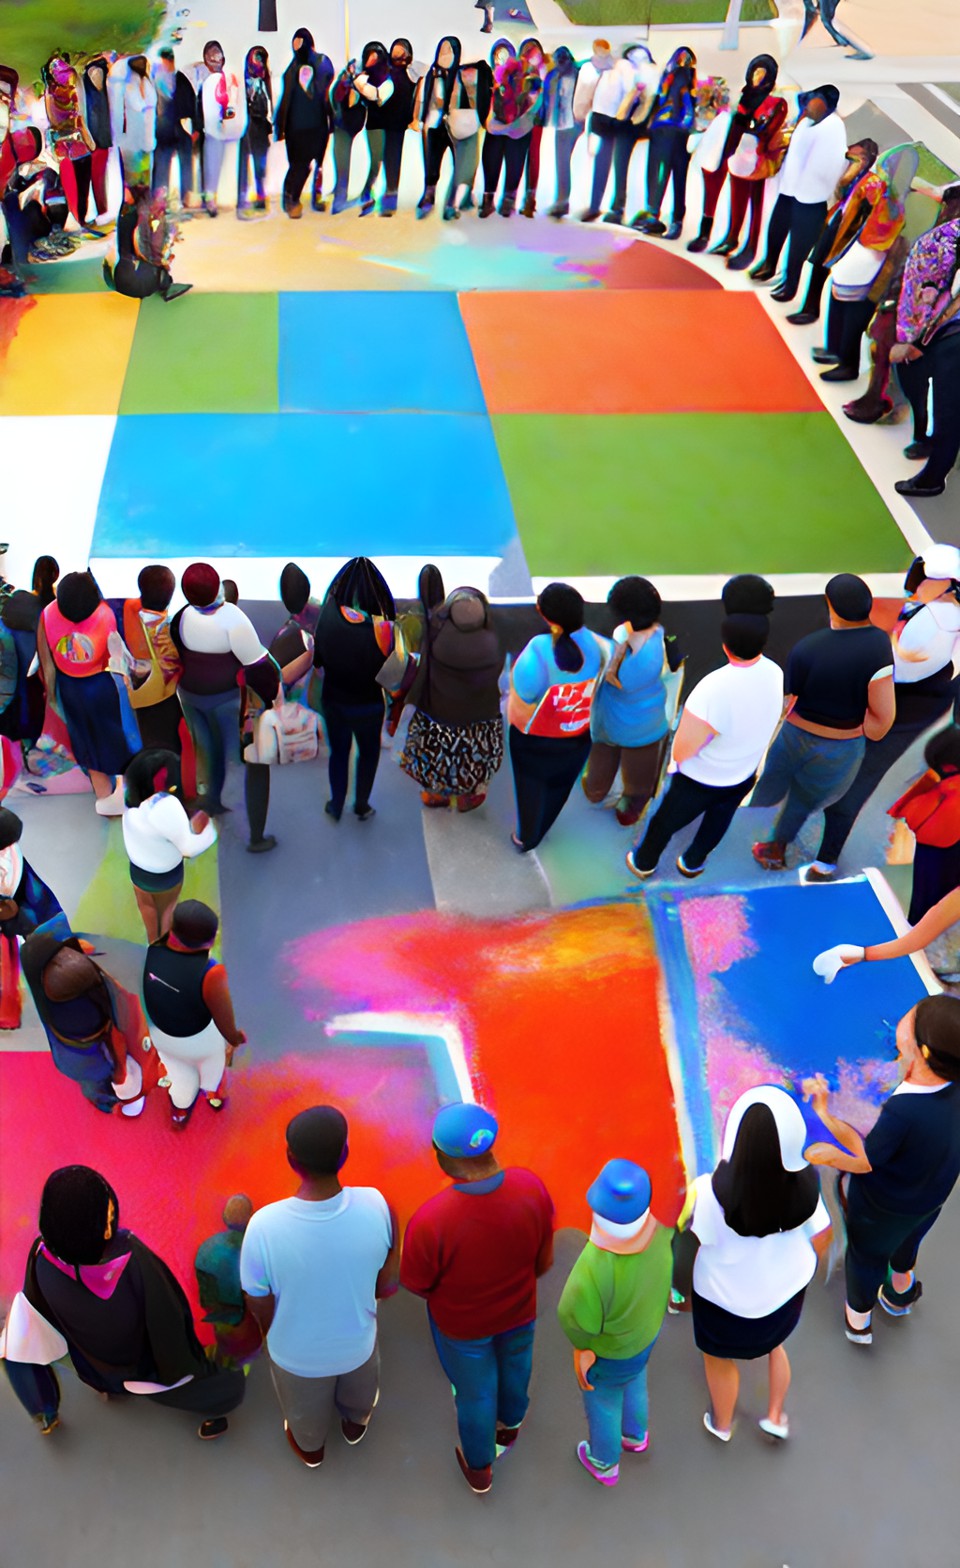 A diverse group of individuals participating in a community art project, symbolizing the transformative potential of art in promoting unity and social change